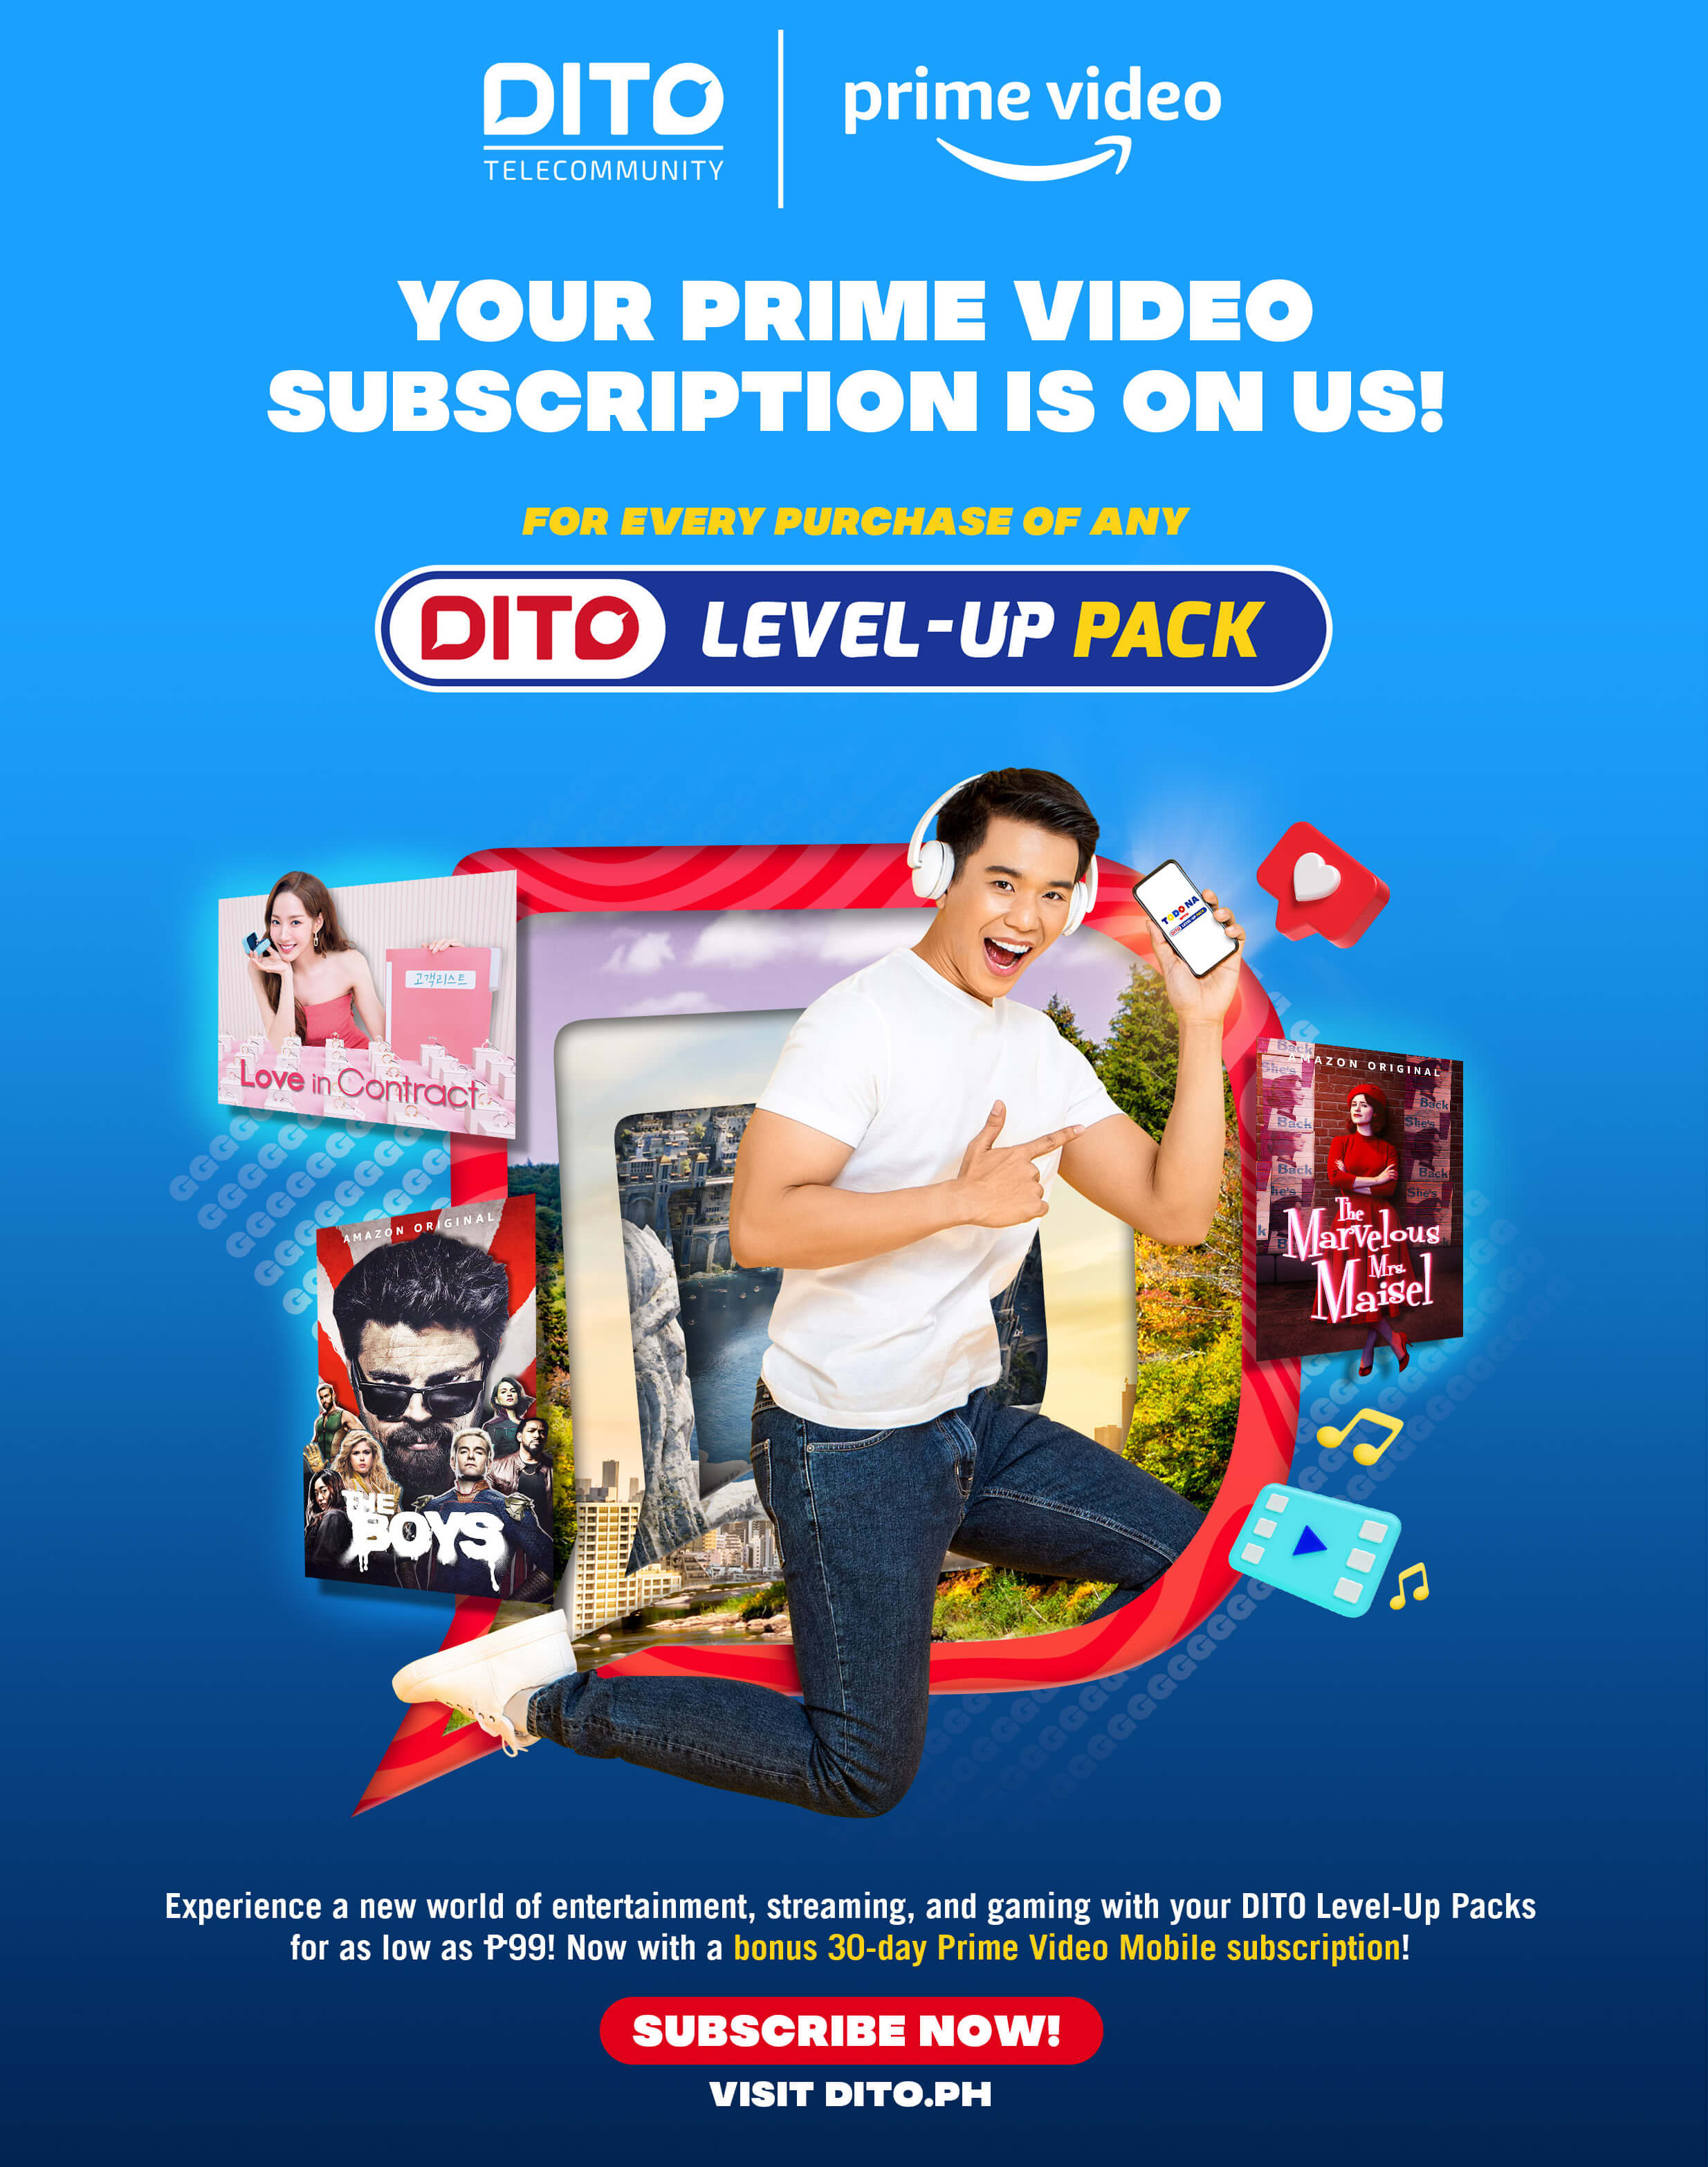 5 things to enjoy with DITO’s Bonus Prime Video Mobile subscription